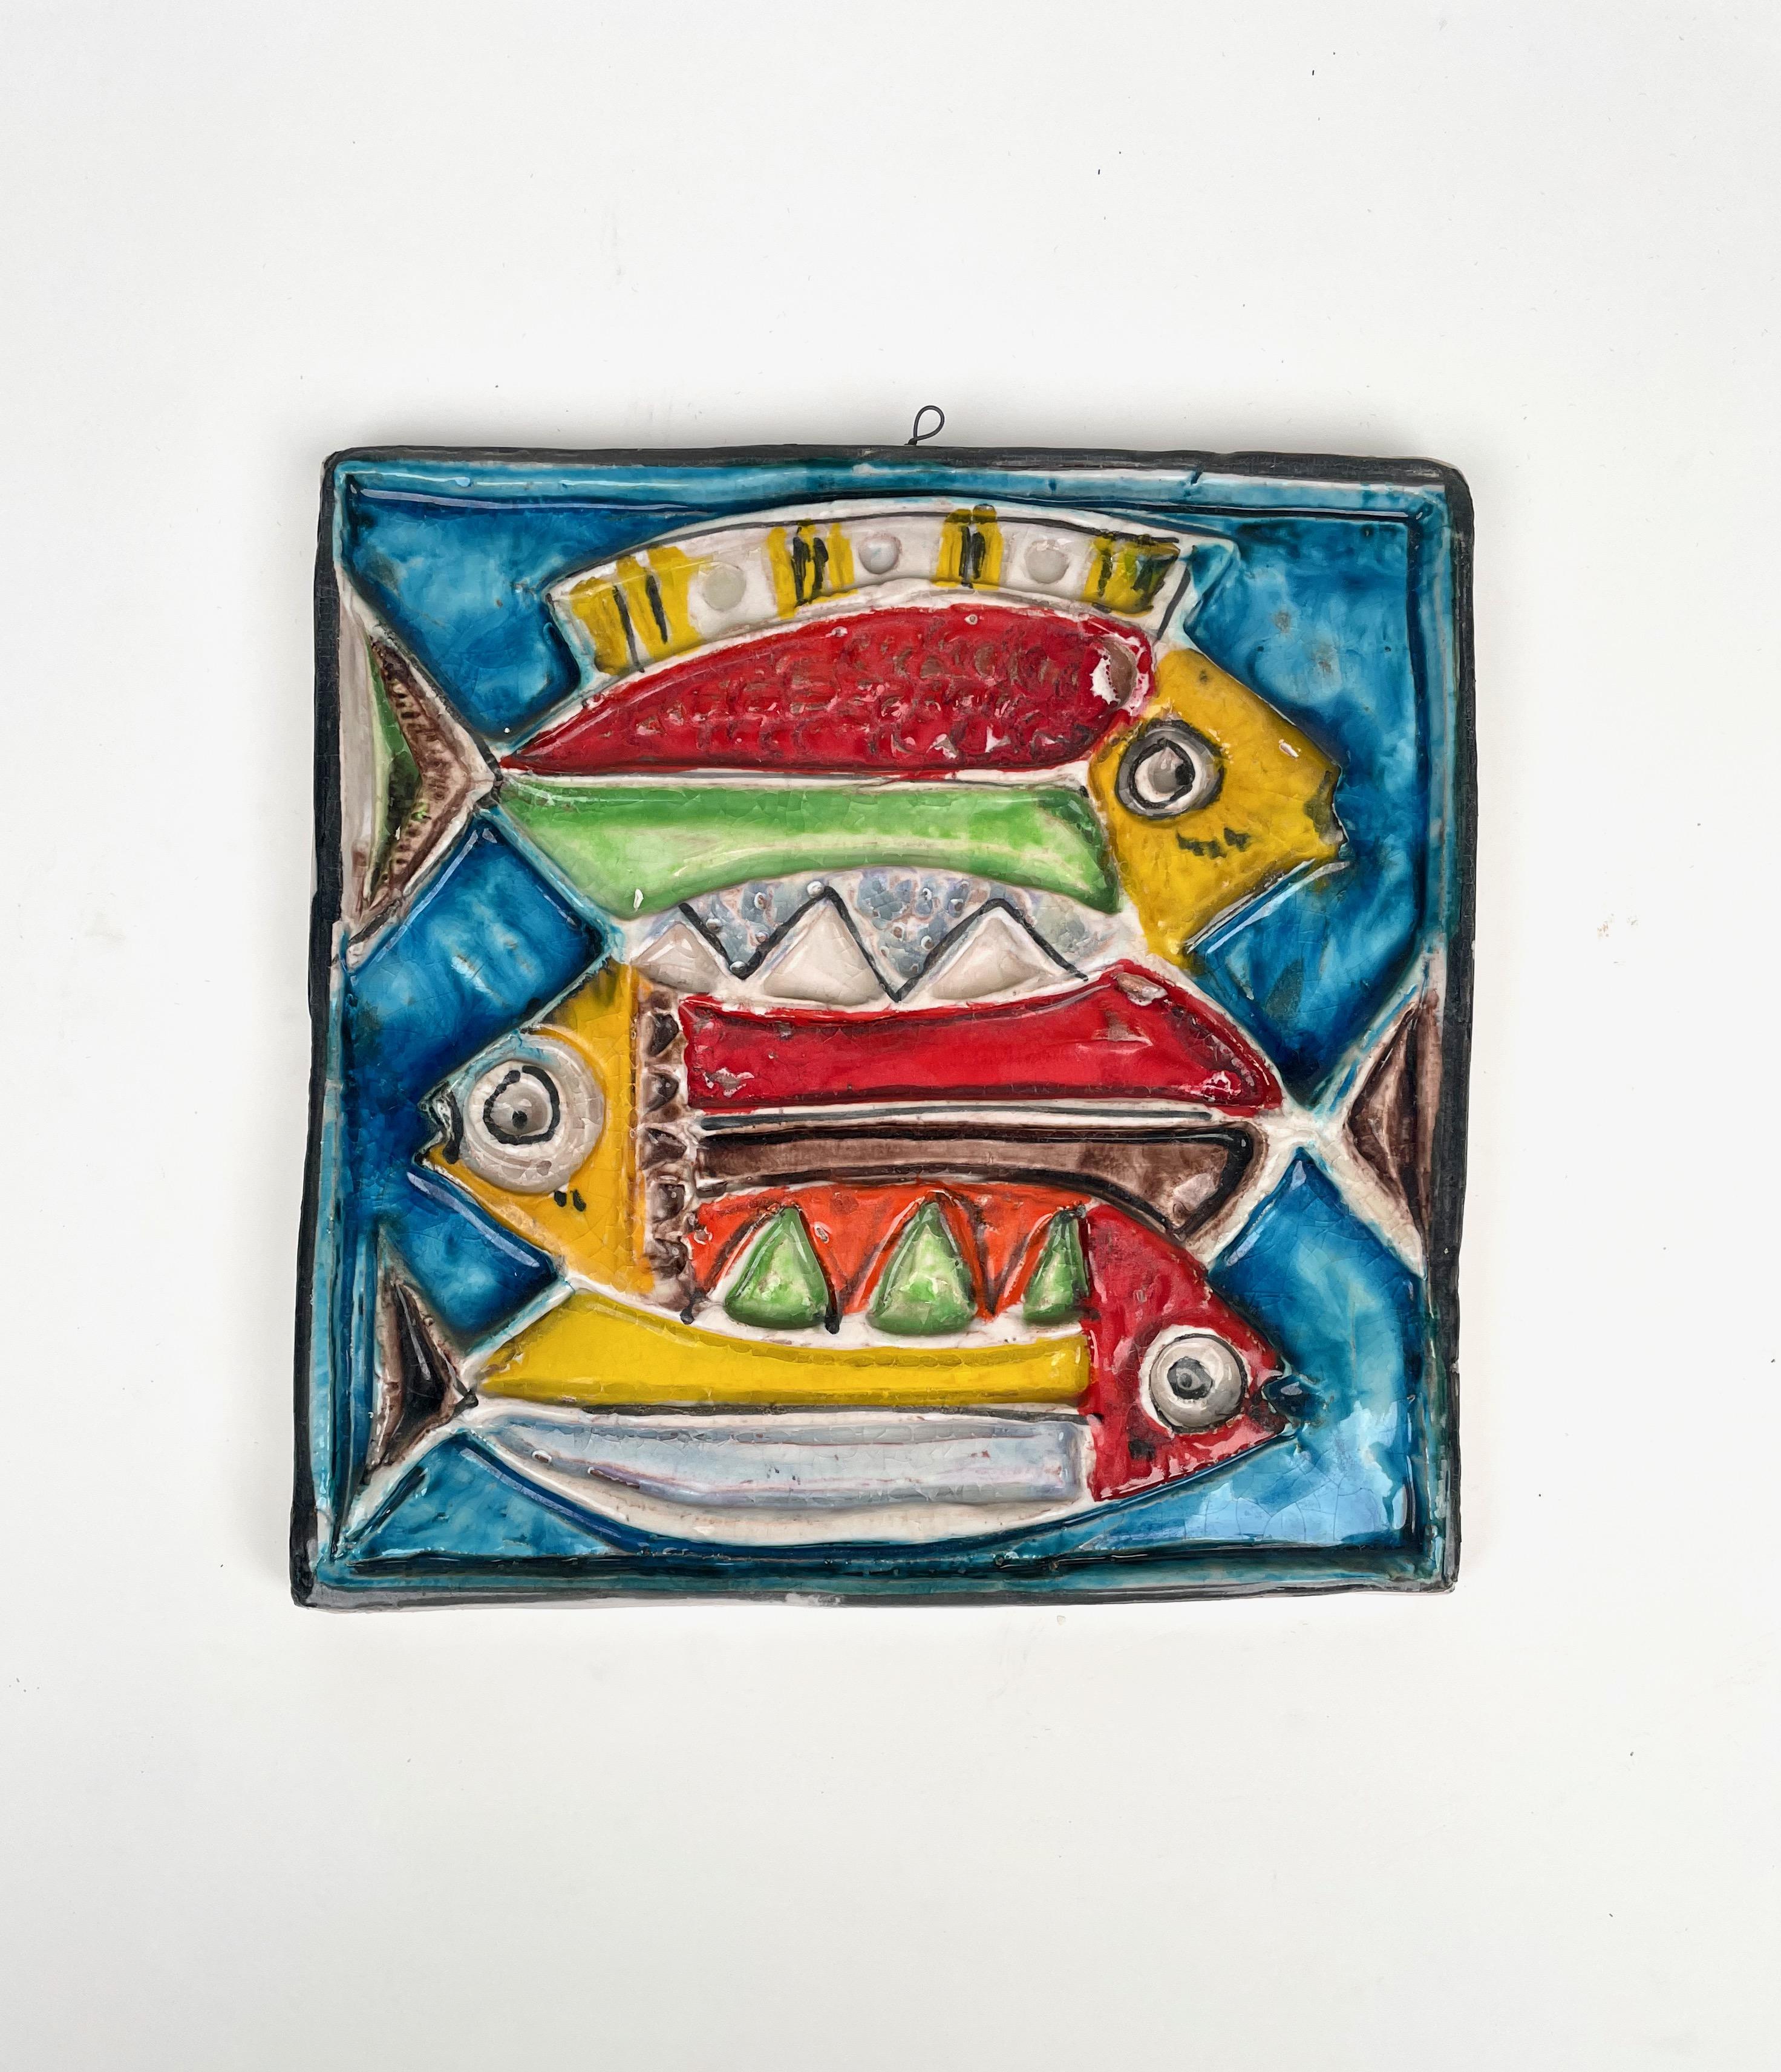 Beautiful squared wall mounted tile plate in colored ceramic representing three fishes by the Italian artisti Giovanni De Simone. 

Giovanni De Simone was a great Sicilian artist from Palermo whose style was inspired by Pablo Picasso paintings.